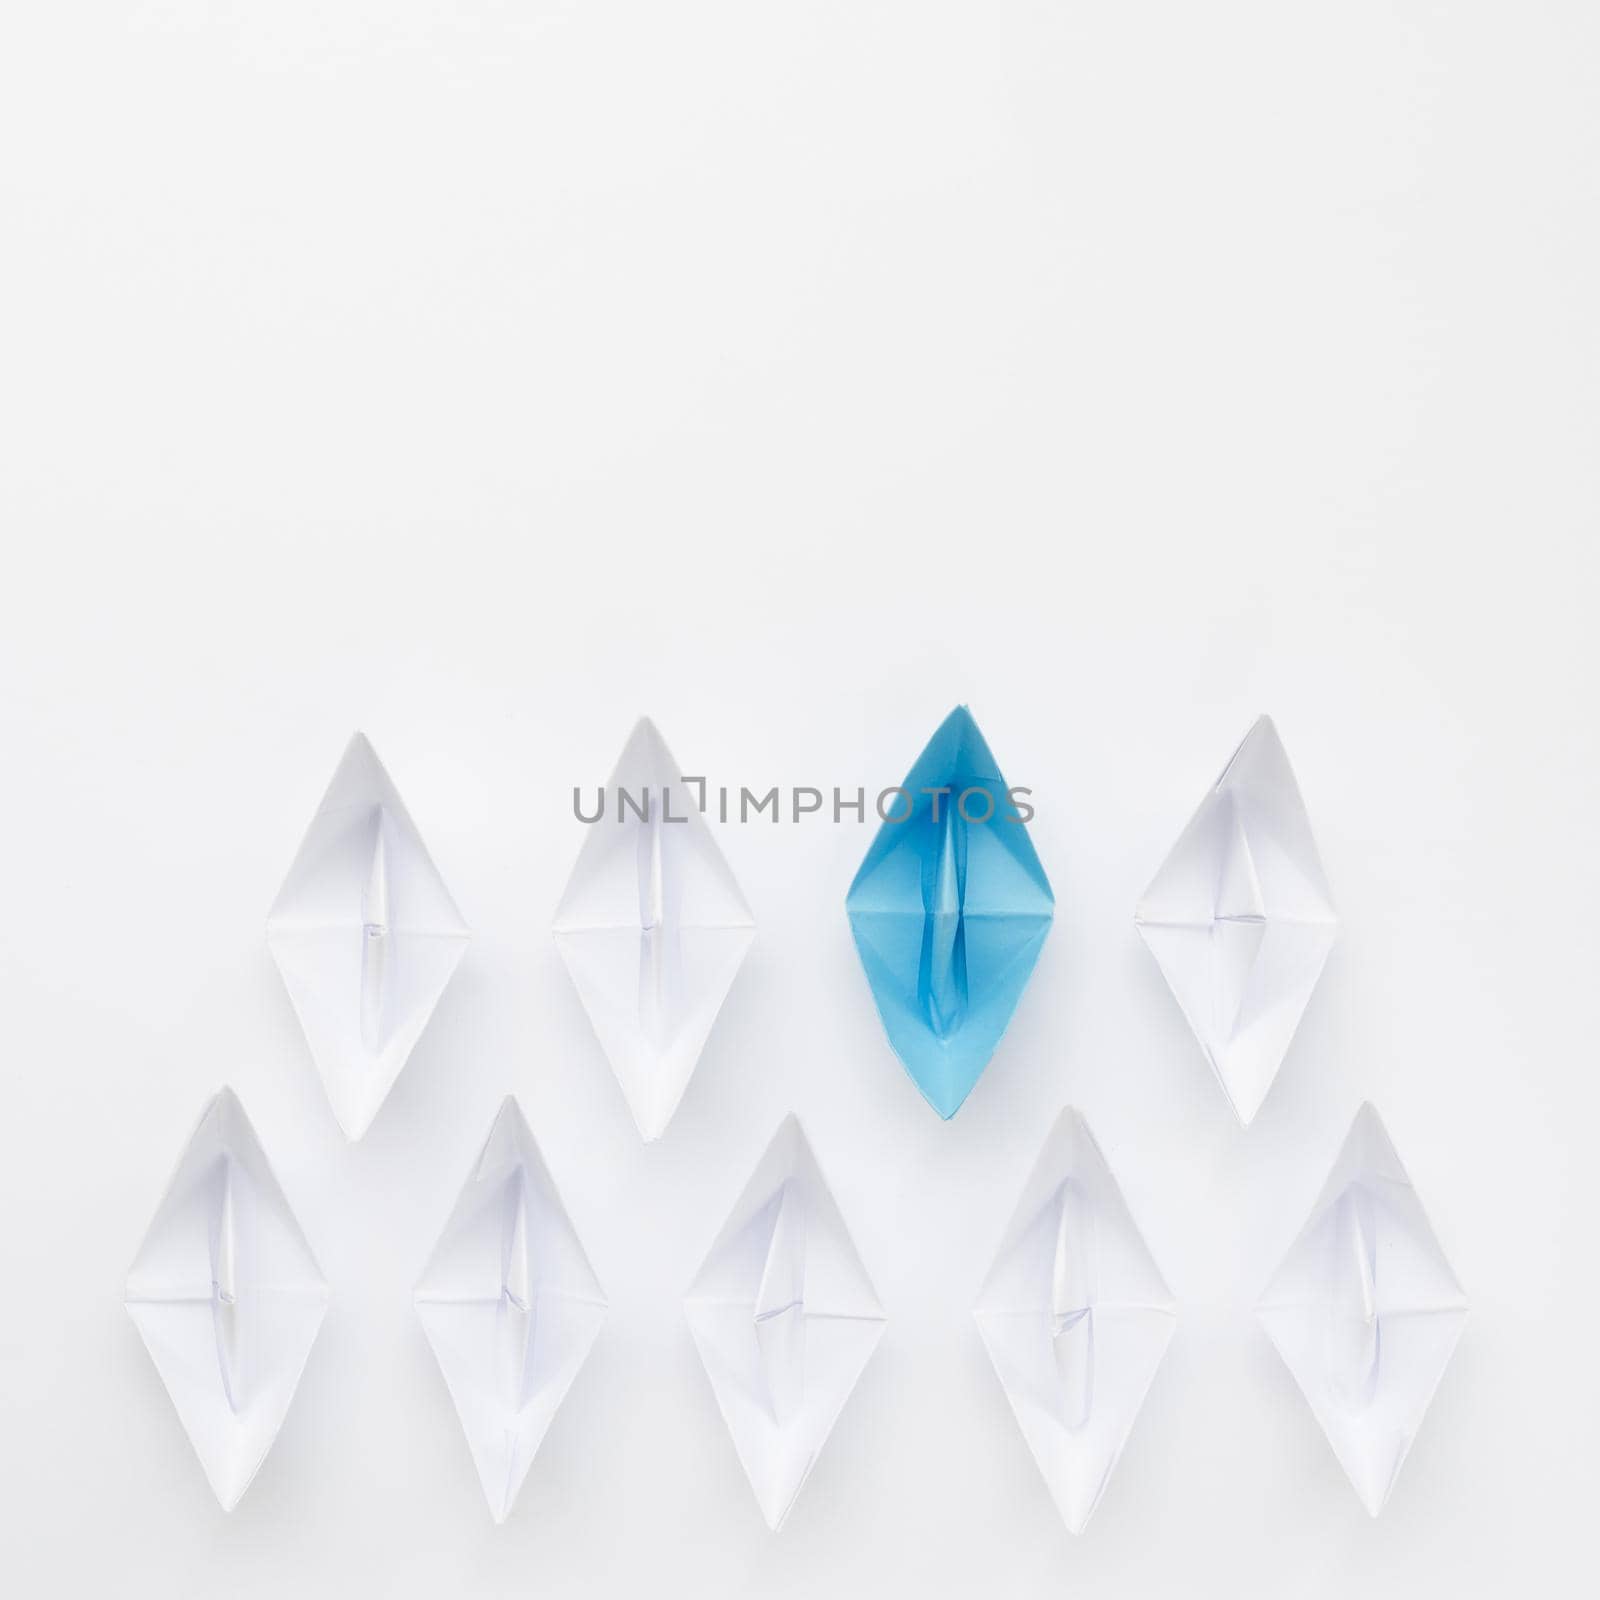 creative composition individuality concept paper boats by Zahard